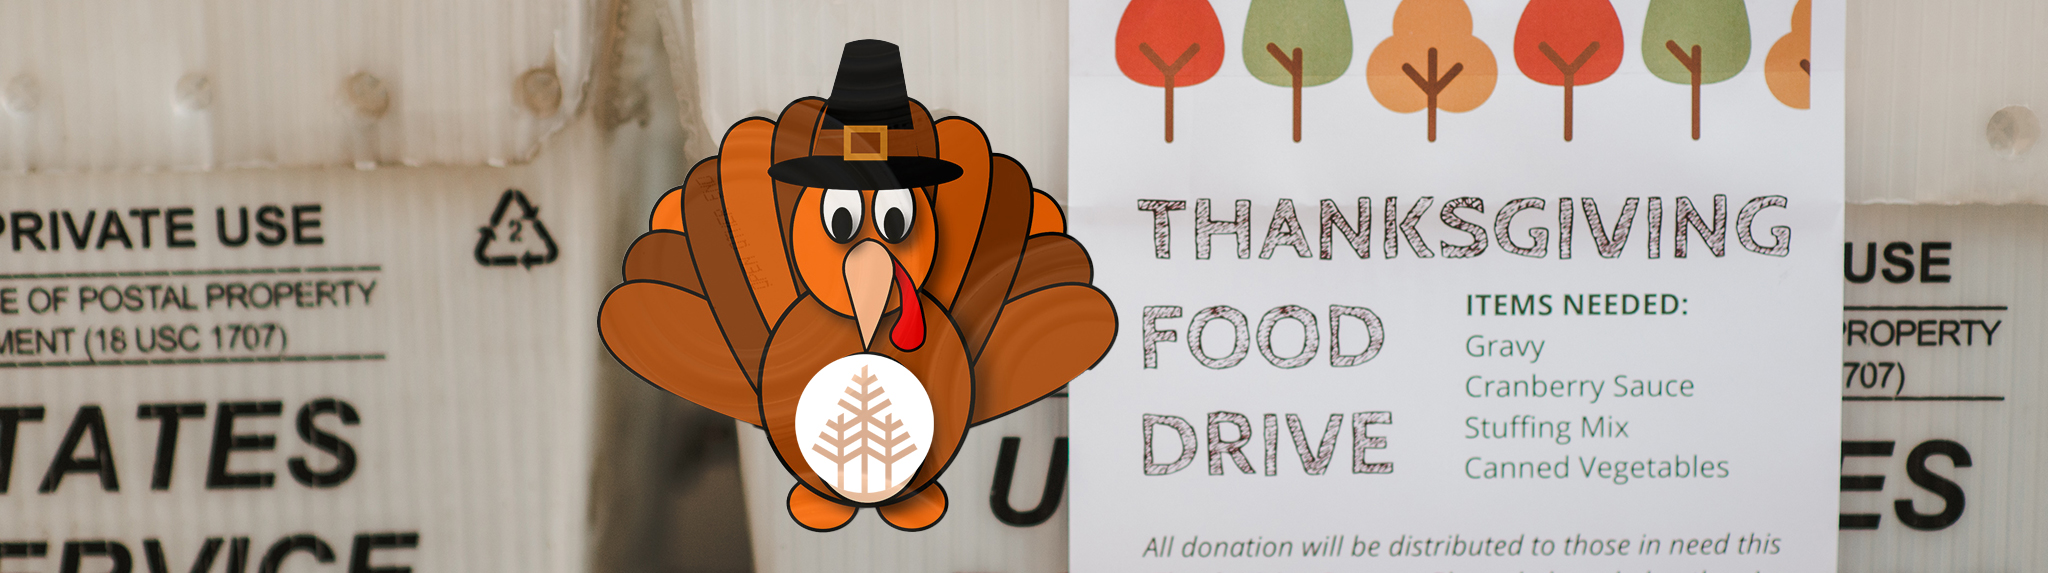 Thanksgiving Food drive banner